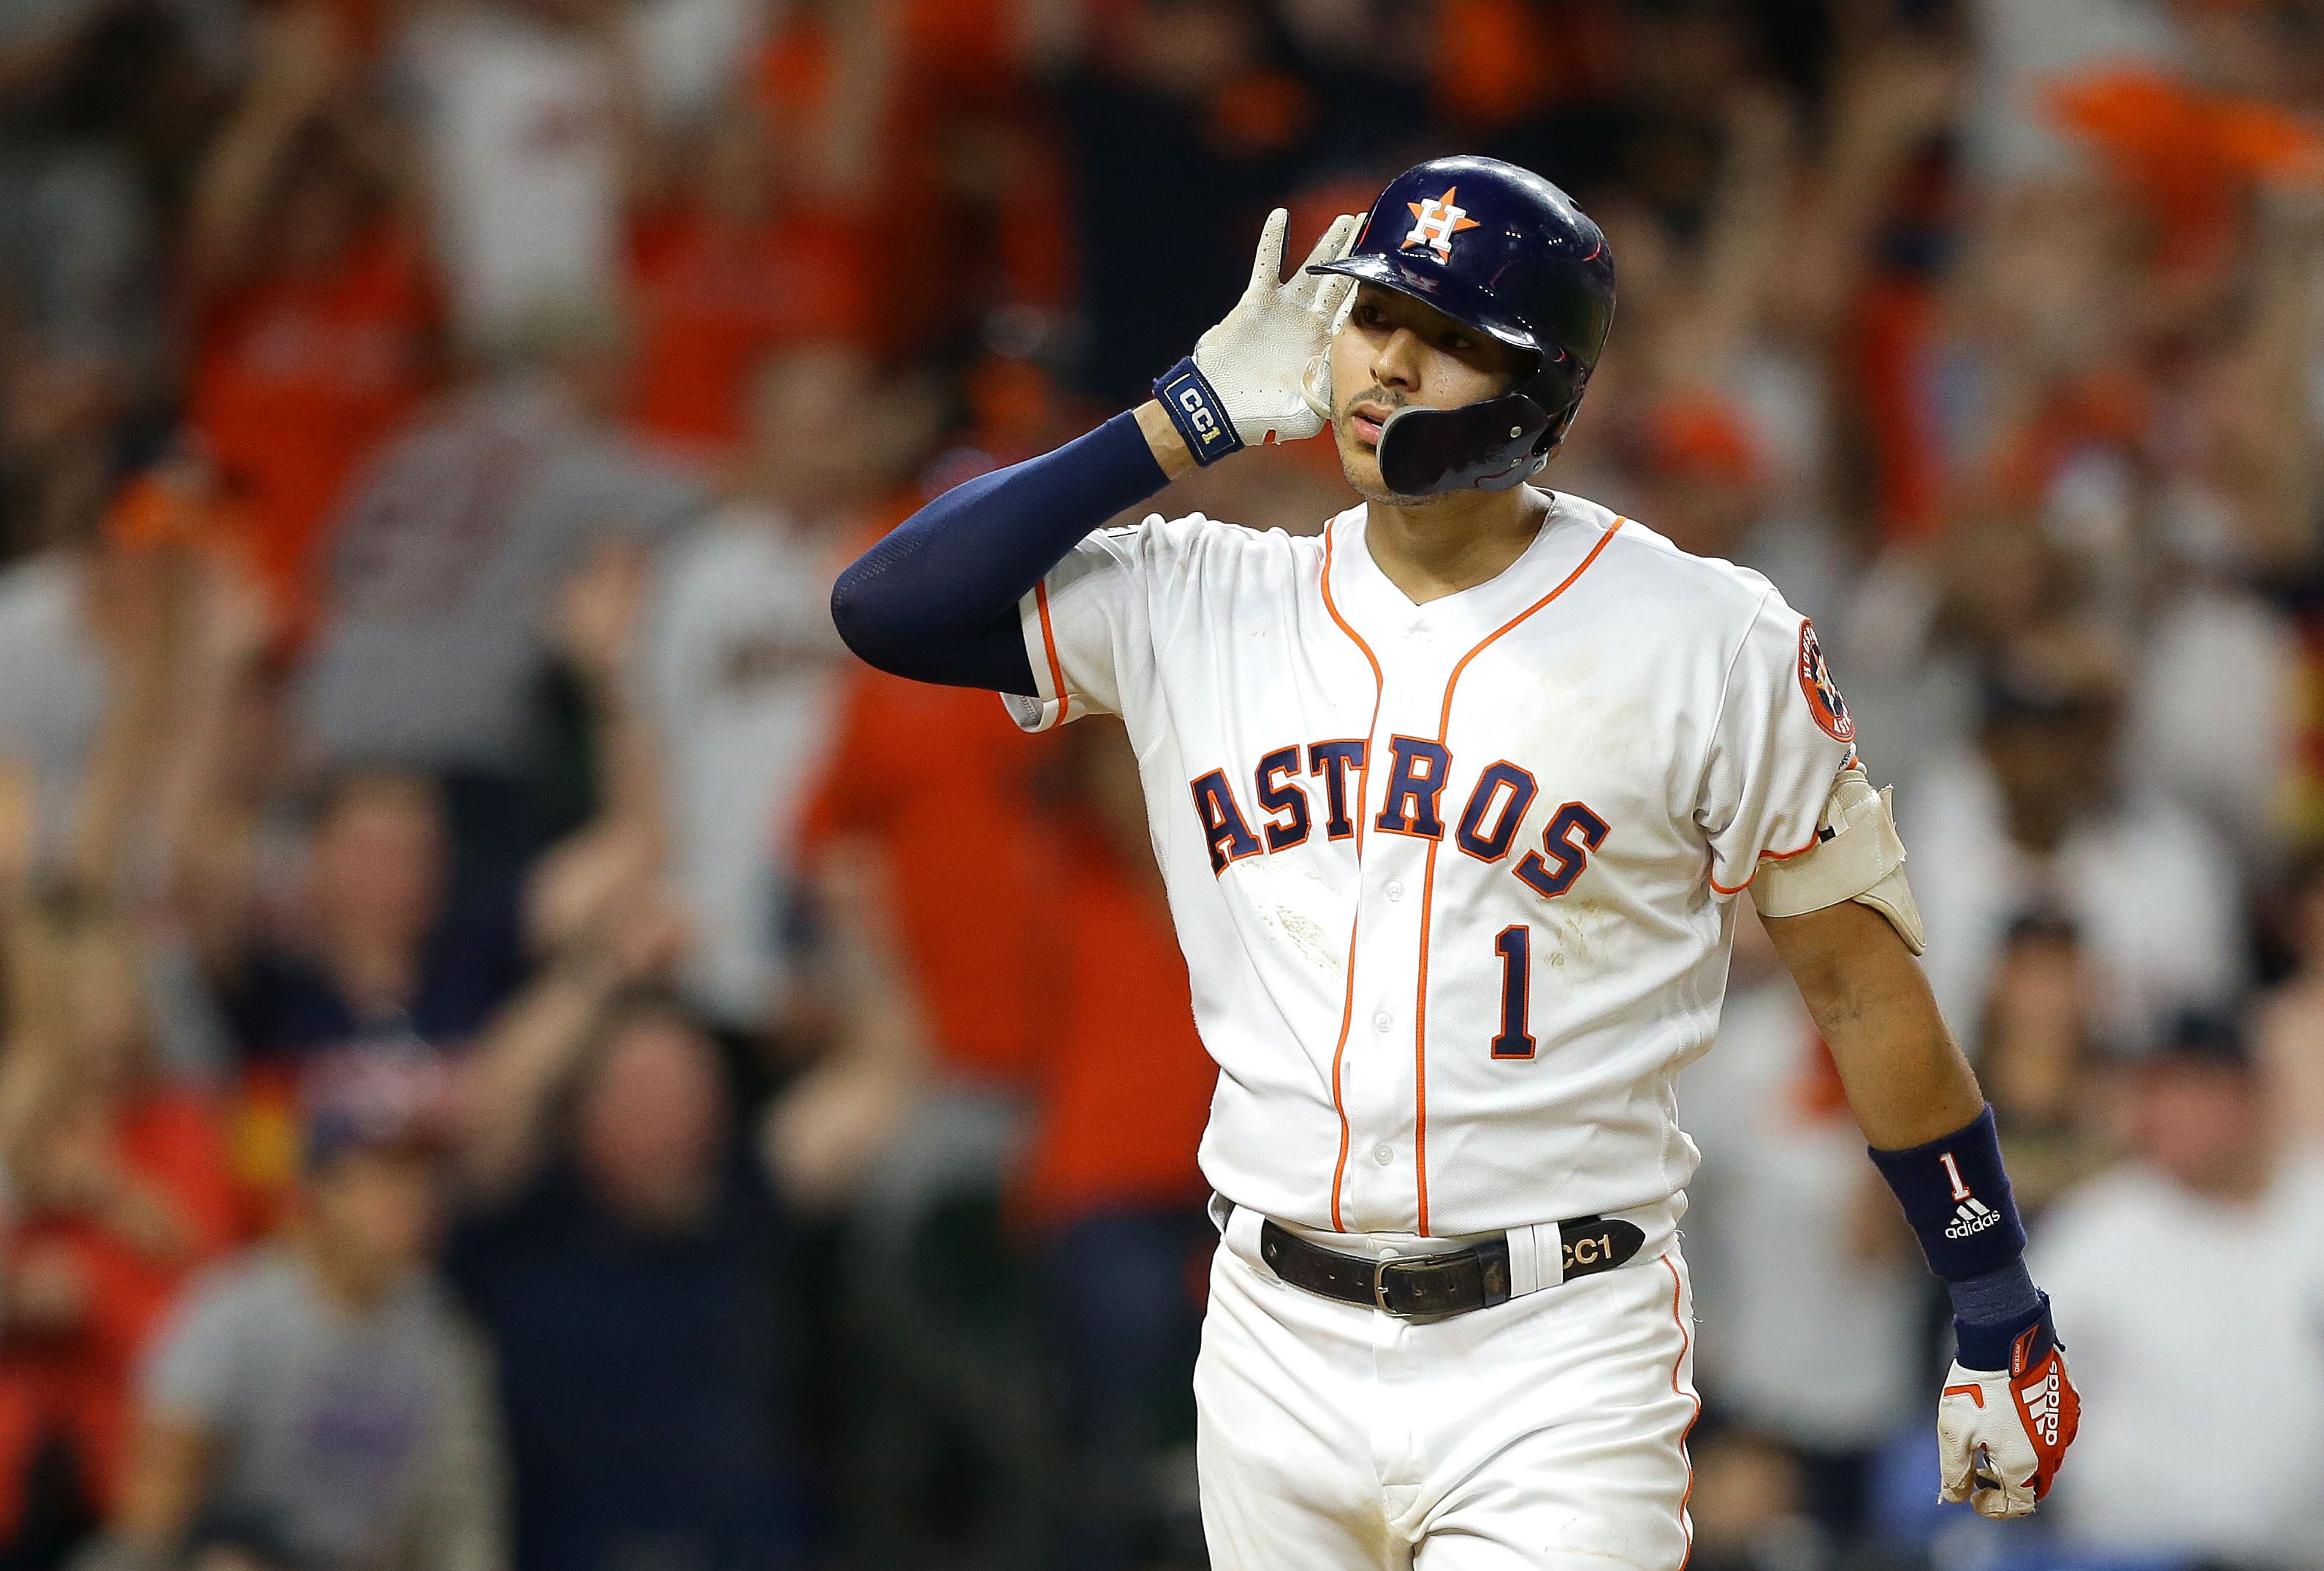 Suárez belts 2 homers, Crawford has 1 as Mariners beat Astros 5-1 - The  Columbian